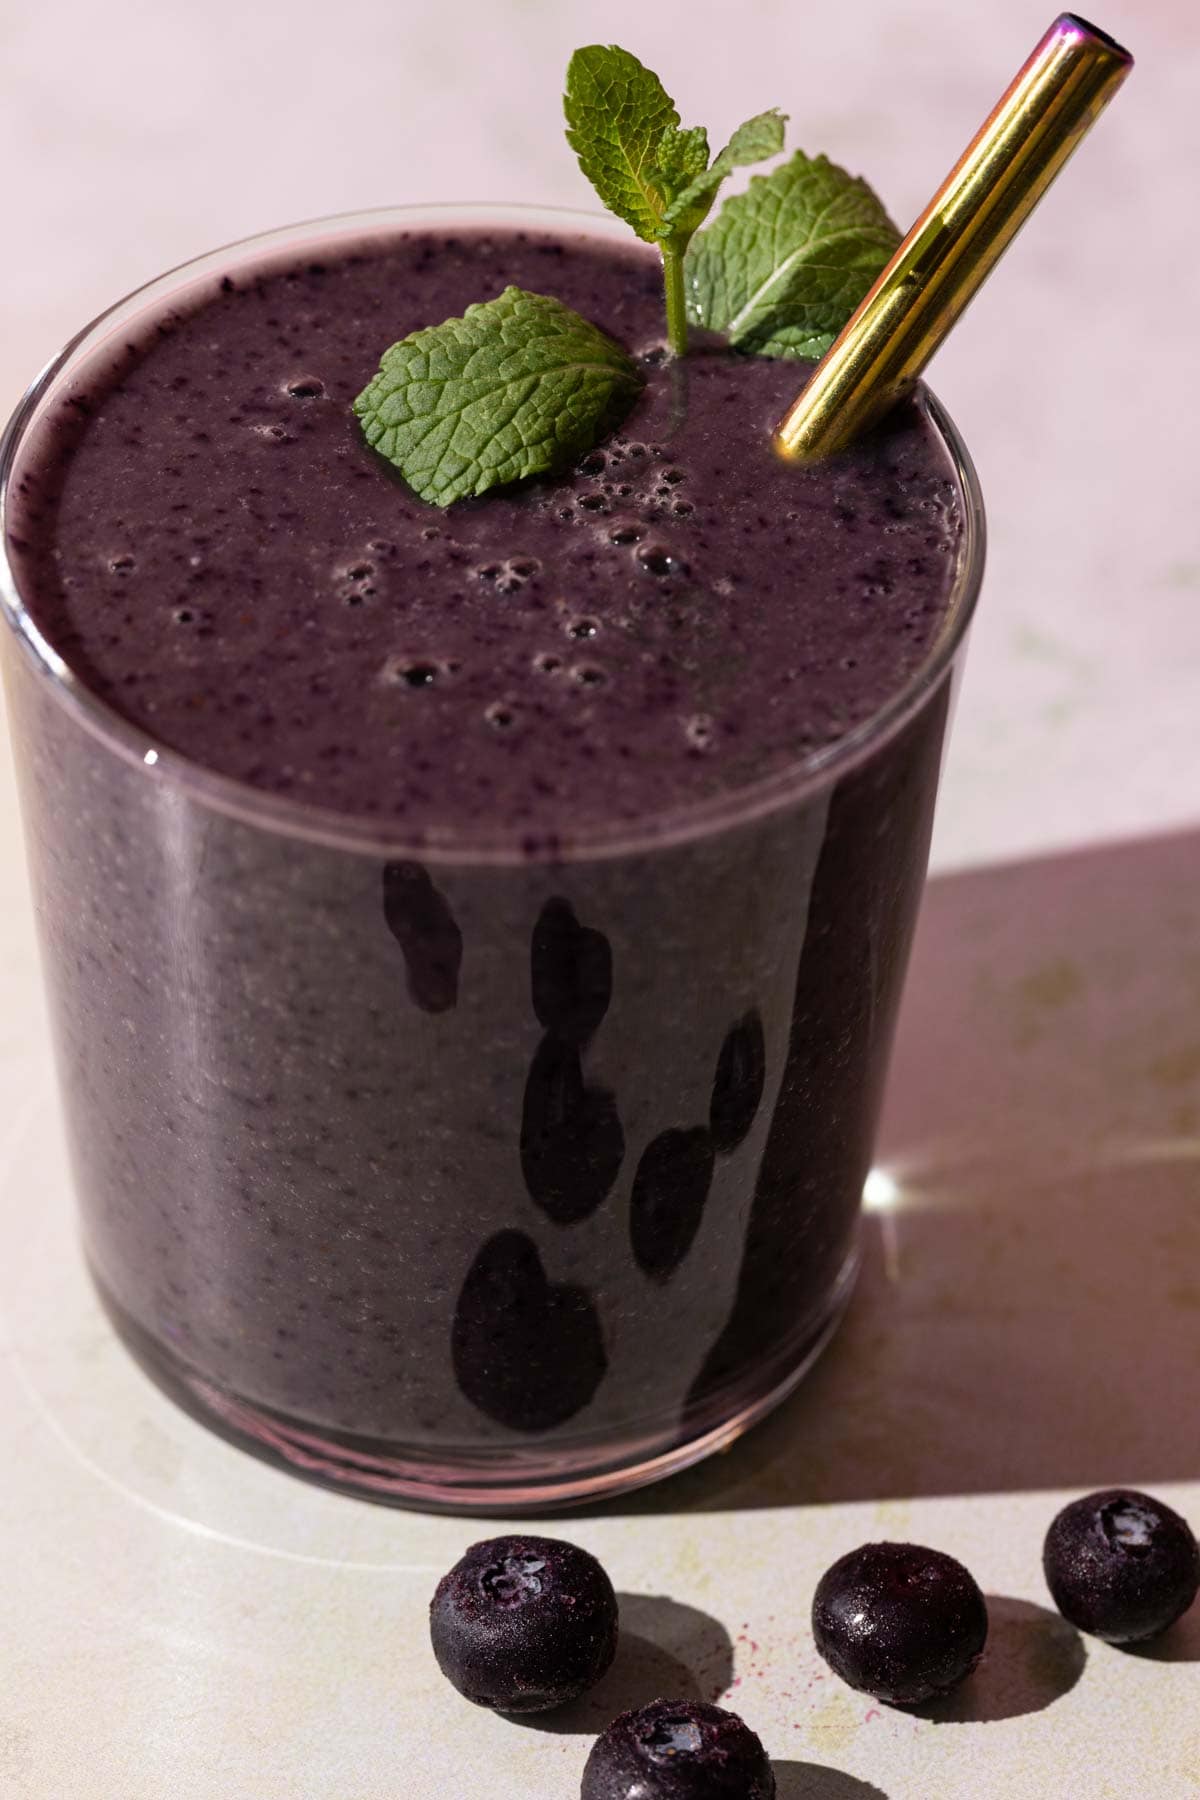 Close up of Blueberry Kale smoothie with mint sprig and metallic straw in glass on a colorful background